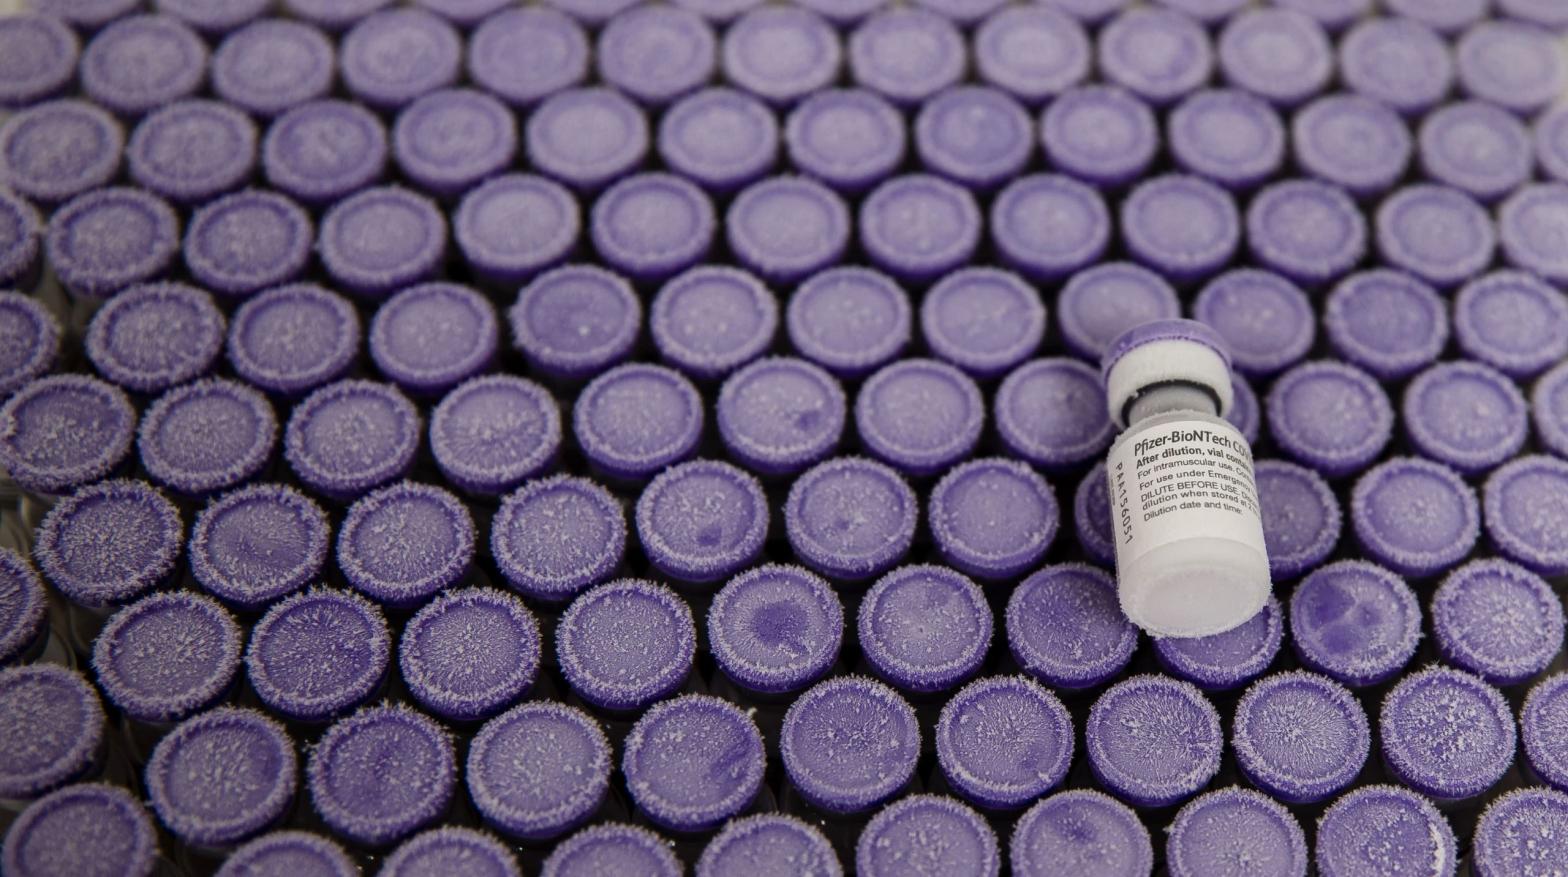 A vial of the Pfizer/BioNTech covid-19 vaccine (Photo: Ariana Drehsler, Getty Images)